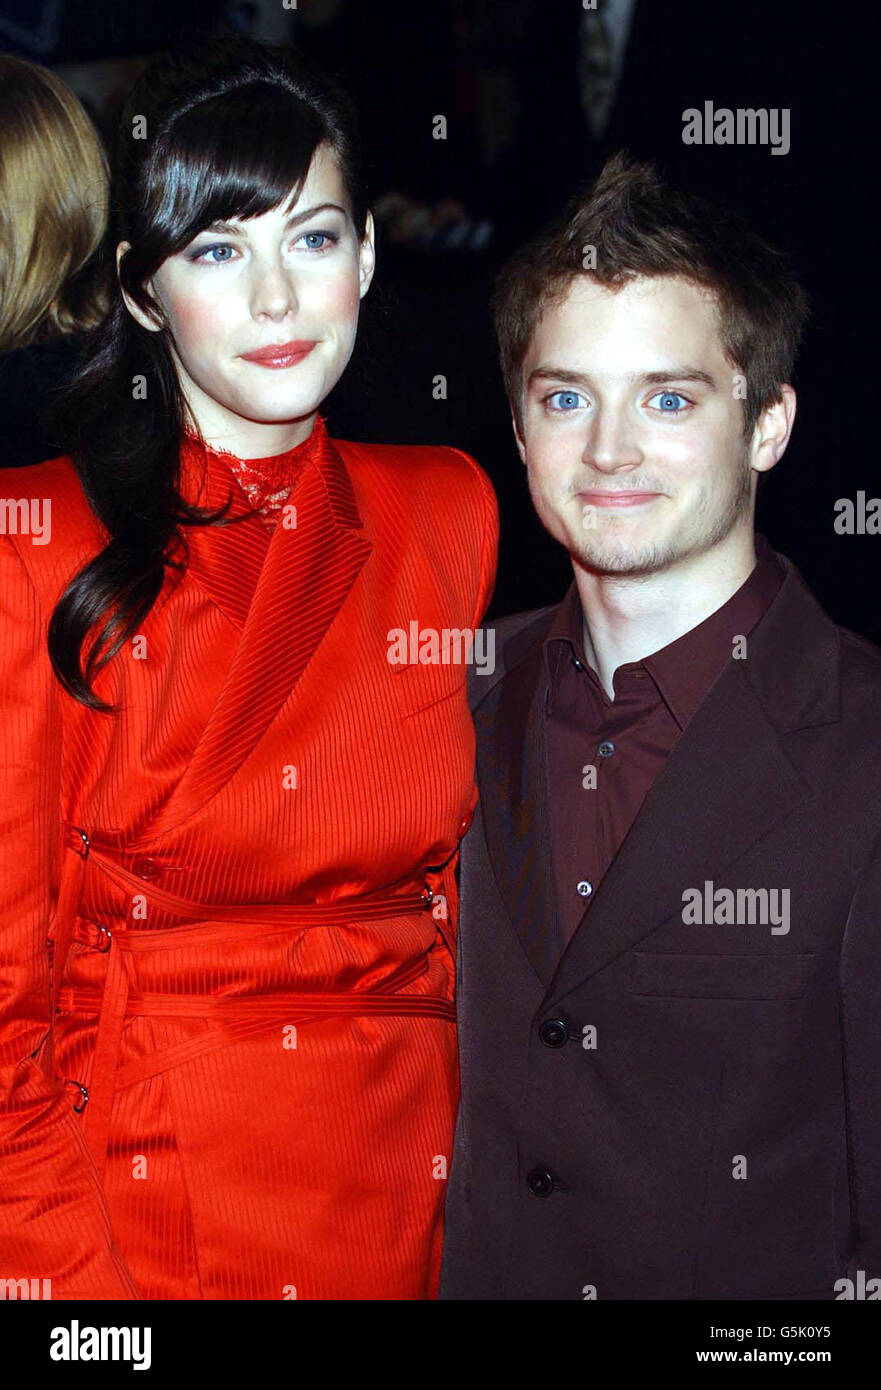 Liv Tyler who plays Arwen and Elijah Wood who plays Frodo arriving at the Odeon Leicester Square in London for the world premiere of Lord of the Rings: The Fellowship of the Ring. Stock Photo